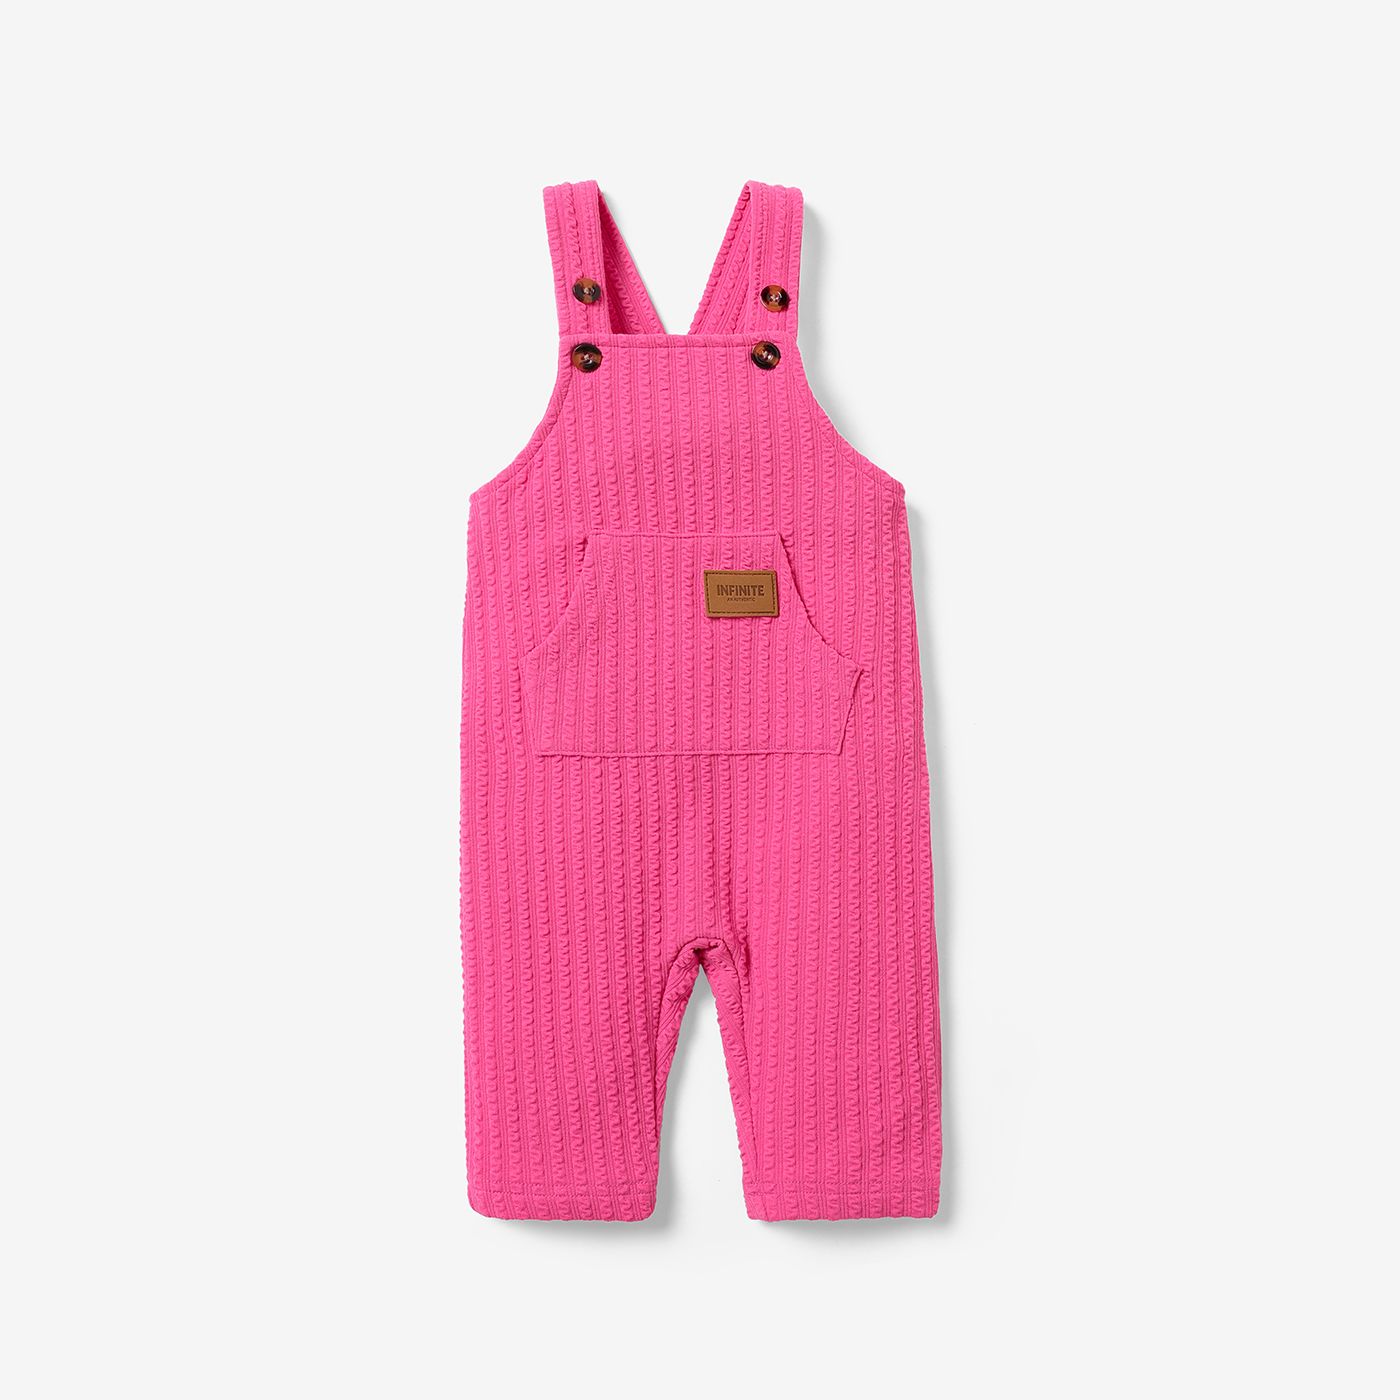 Baby Girl/Boy Stylish Solid Color Overalls